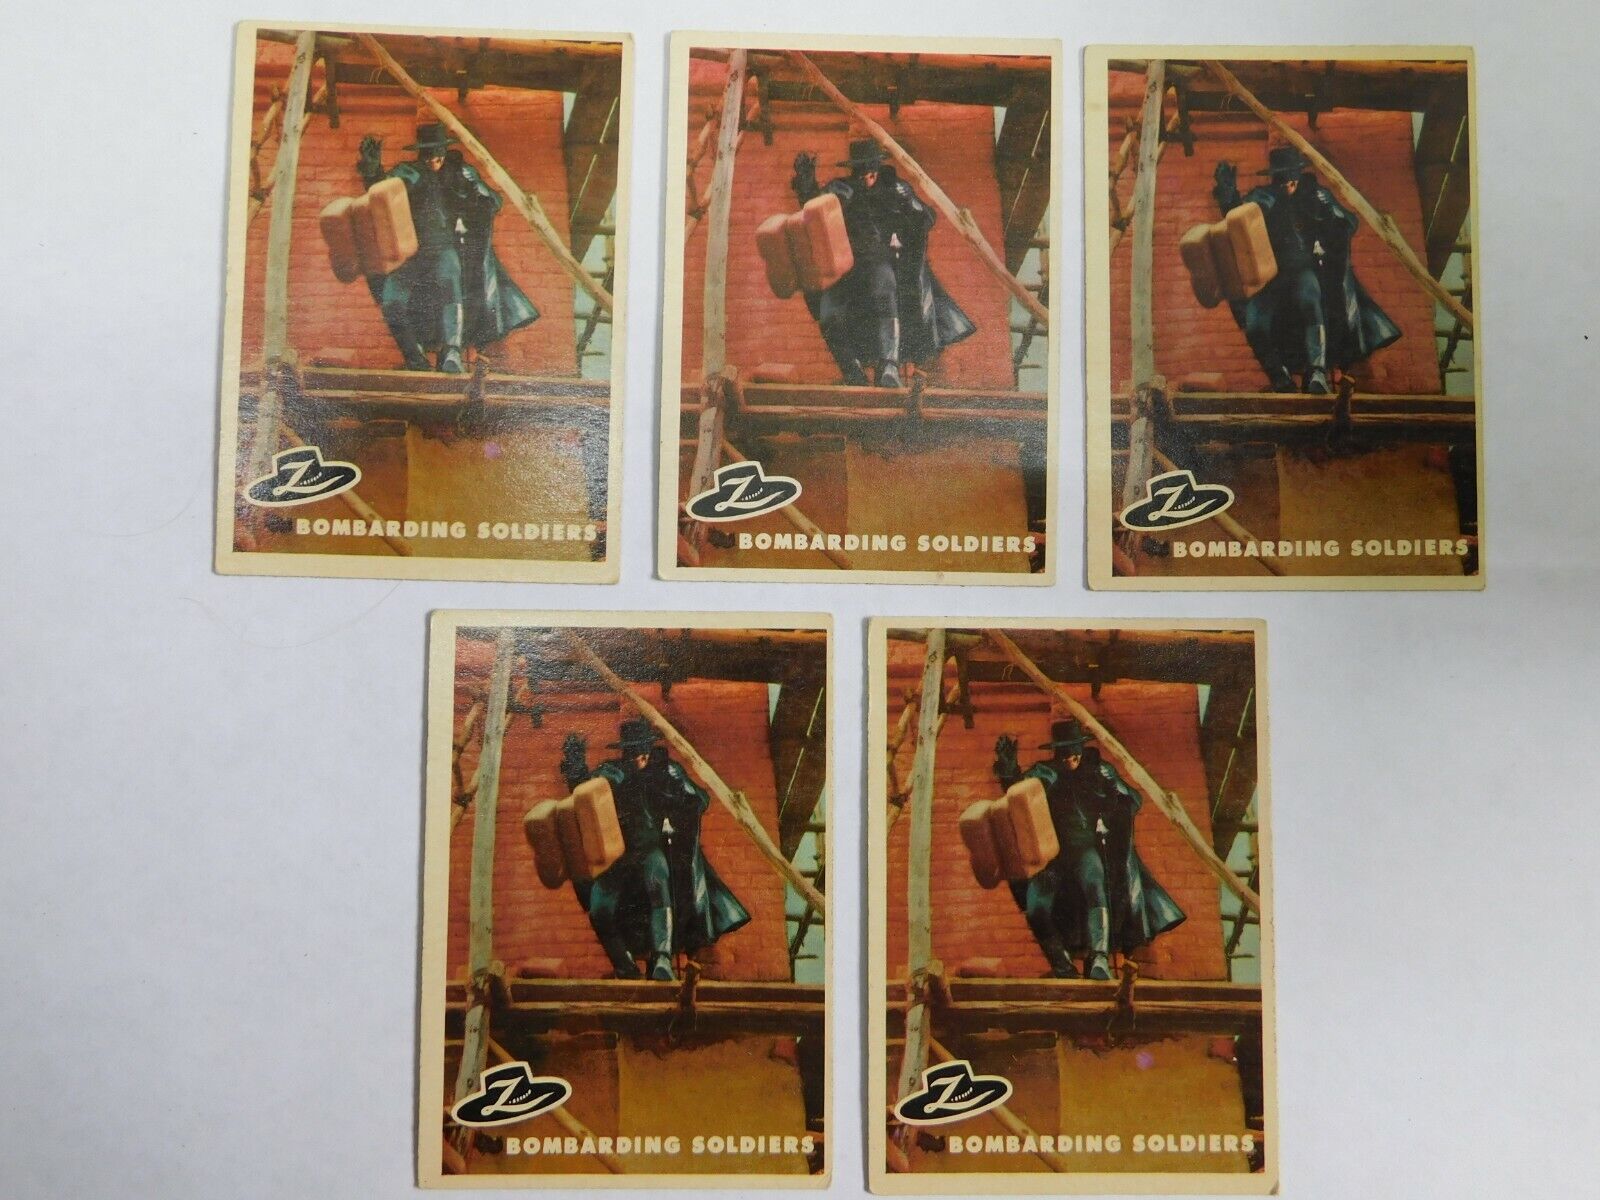 10 1958 Topps Walt Disney\'s Zorro #33 #34 #35 10 Total Collectable cards